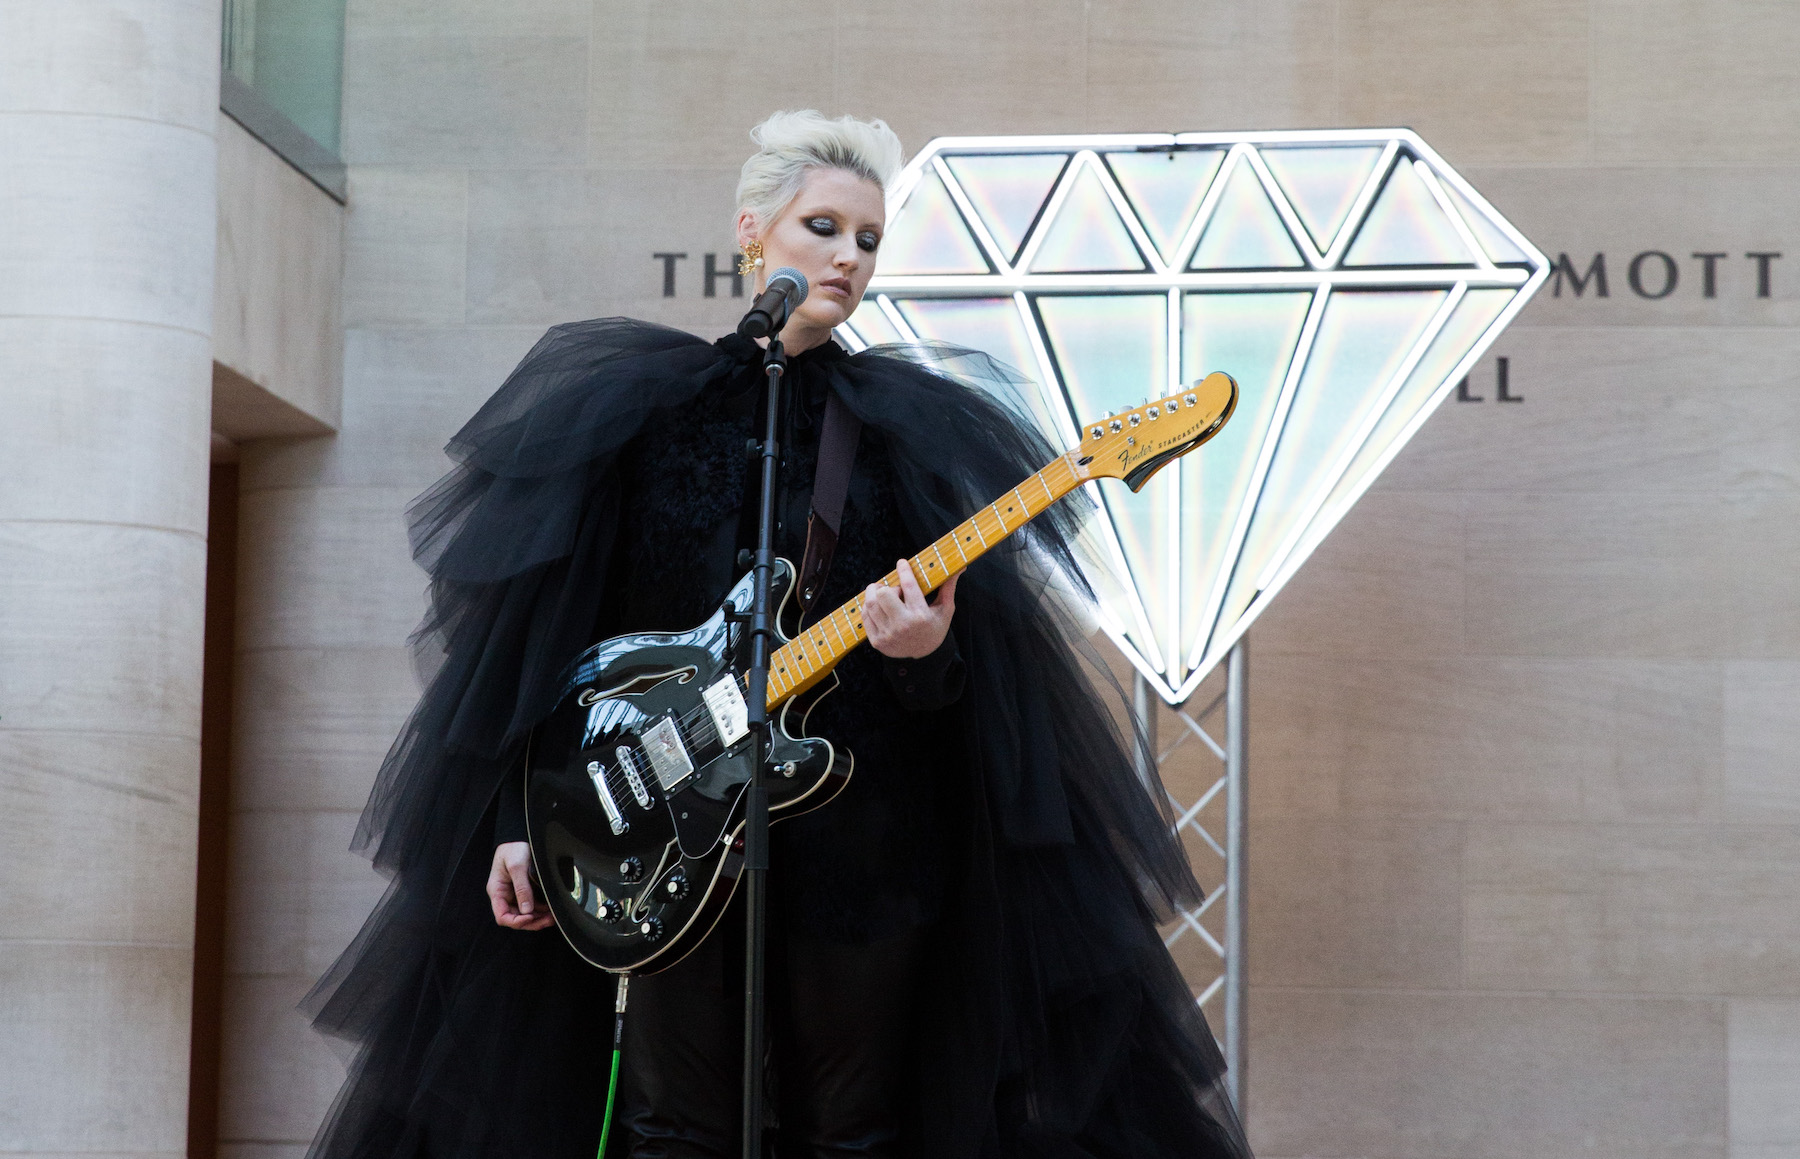 Women in black, frilly dress playing guitar at a microphone.